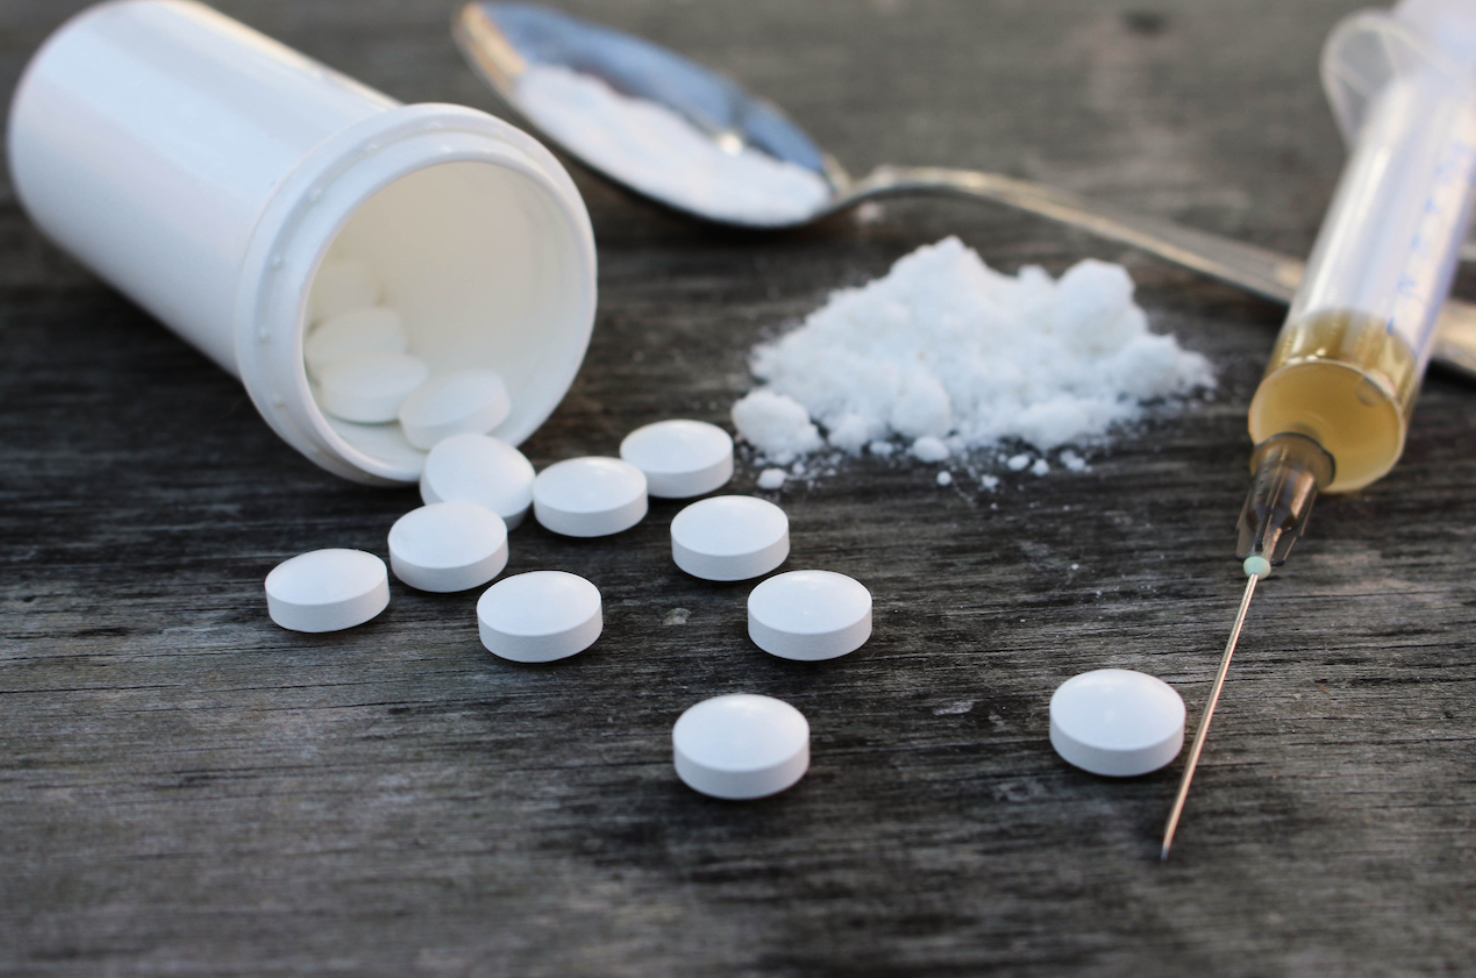 Study: Programs to Limit Prescription Opioids May Spur Illegal Drug Use